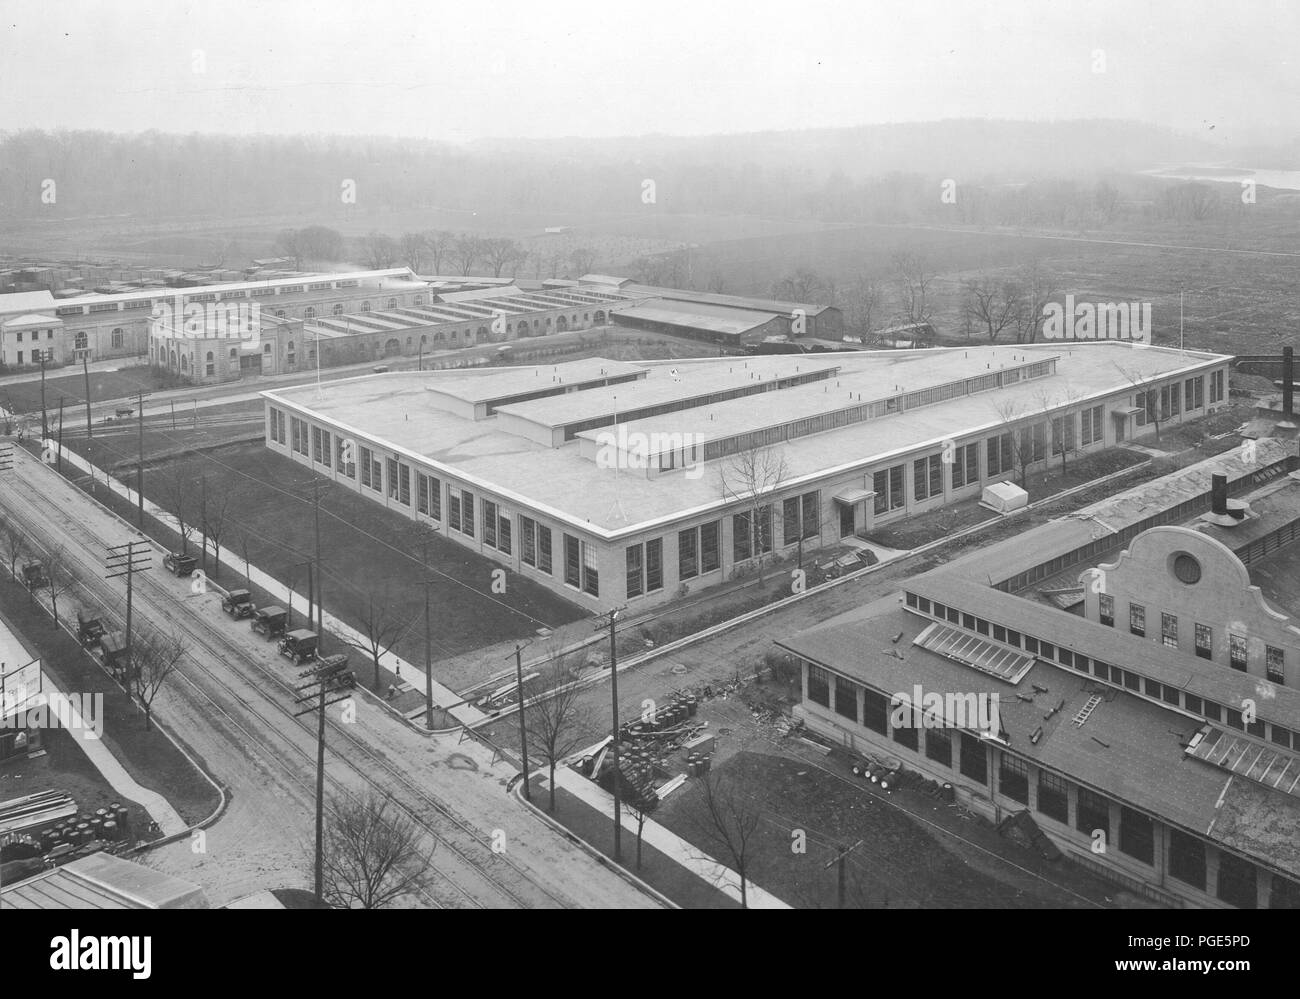 Aeroplane material manufactured for government use. Building No. 20, erected in 30 day, for purpose of producing Azimuth heads and French bracket Fuze setters. National Cash Register Co. plant, Dayton, O Stock Photo